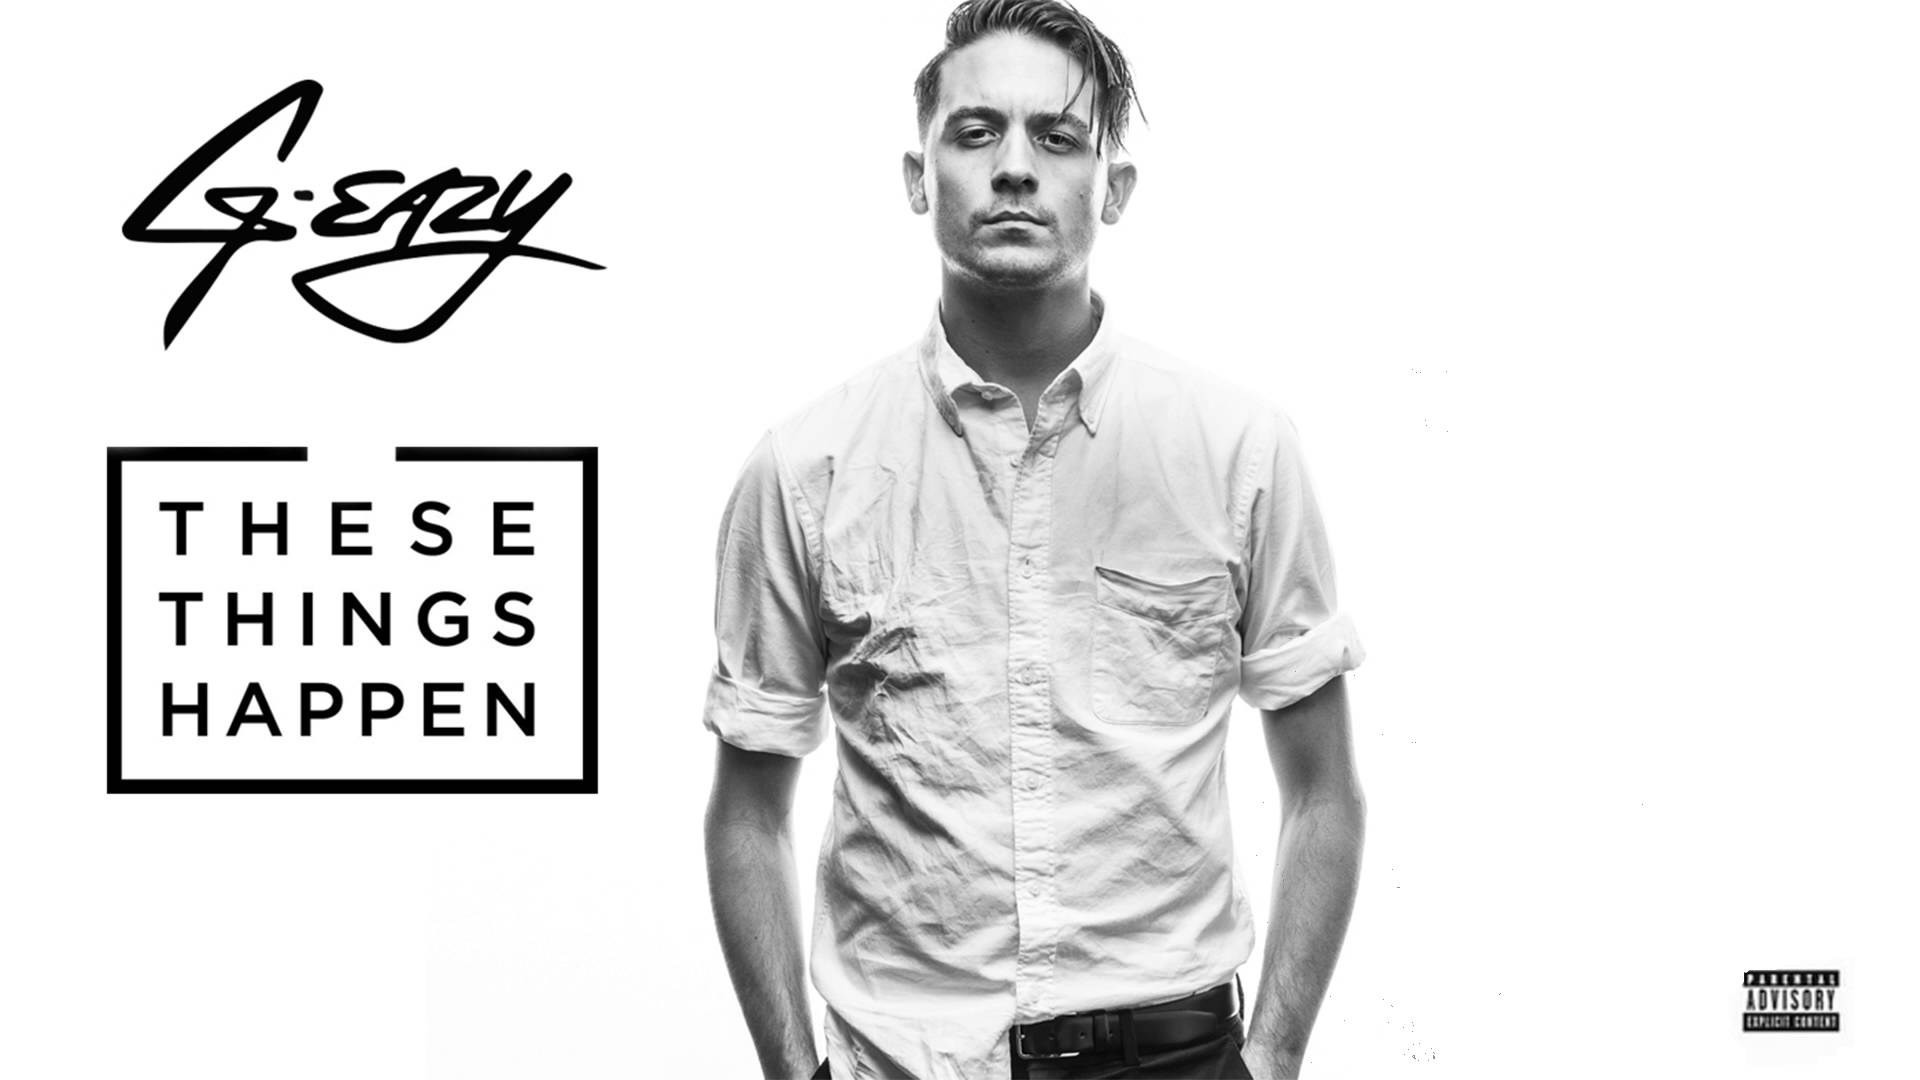 1920x1080 g eazy wallpaper these things happen